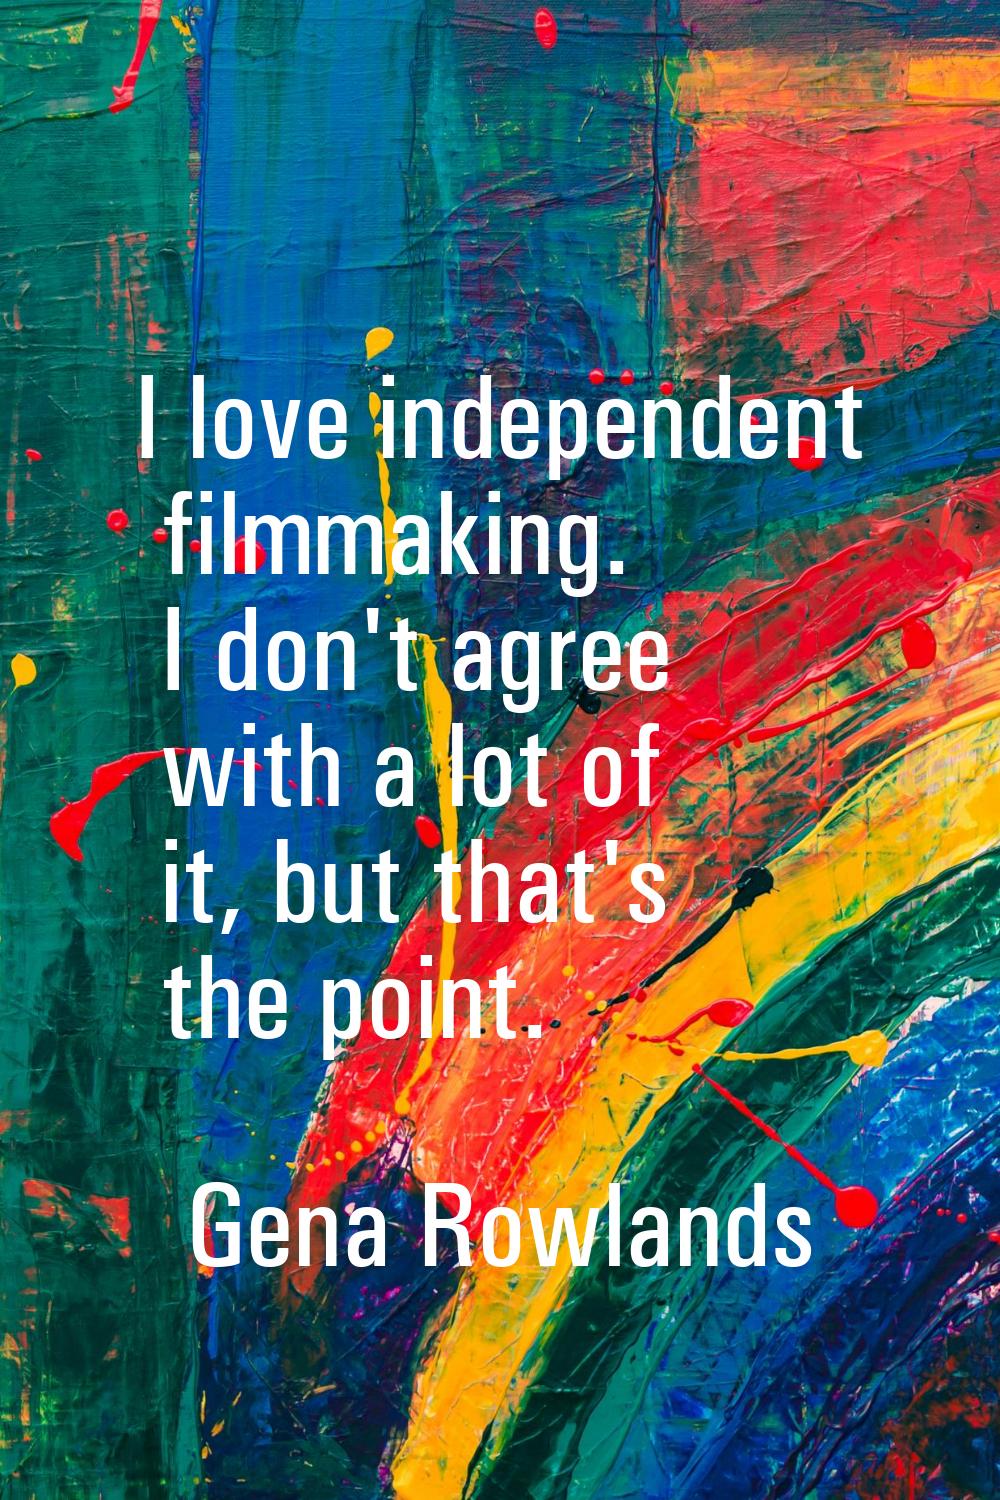 I love independent filmmaking. I don't agree with a lot of it, but that's the point.